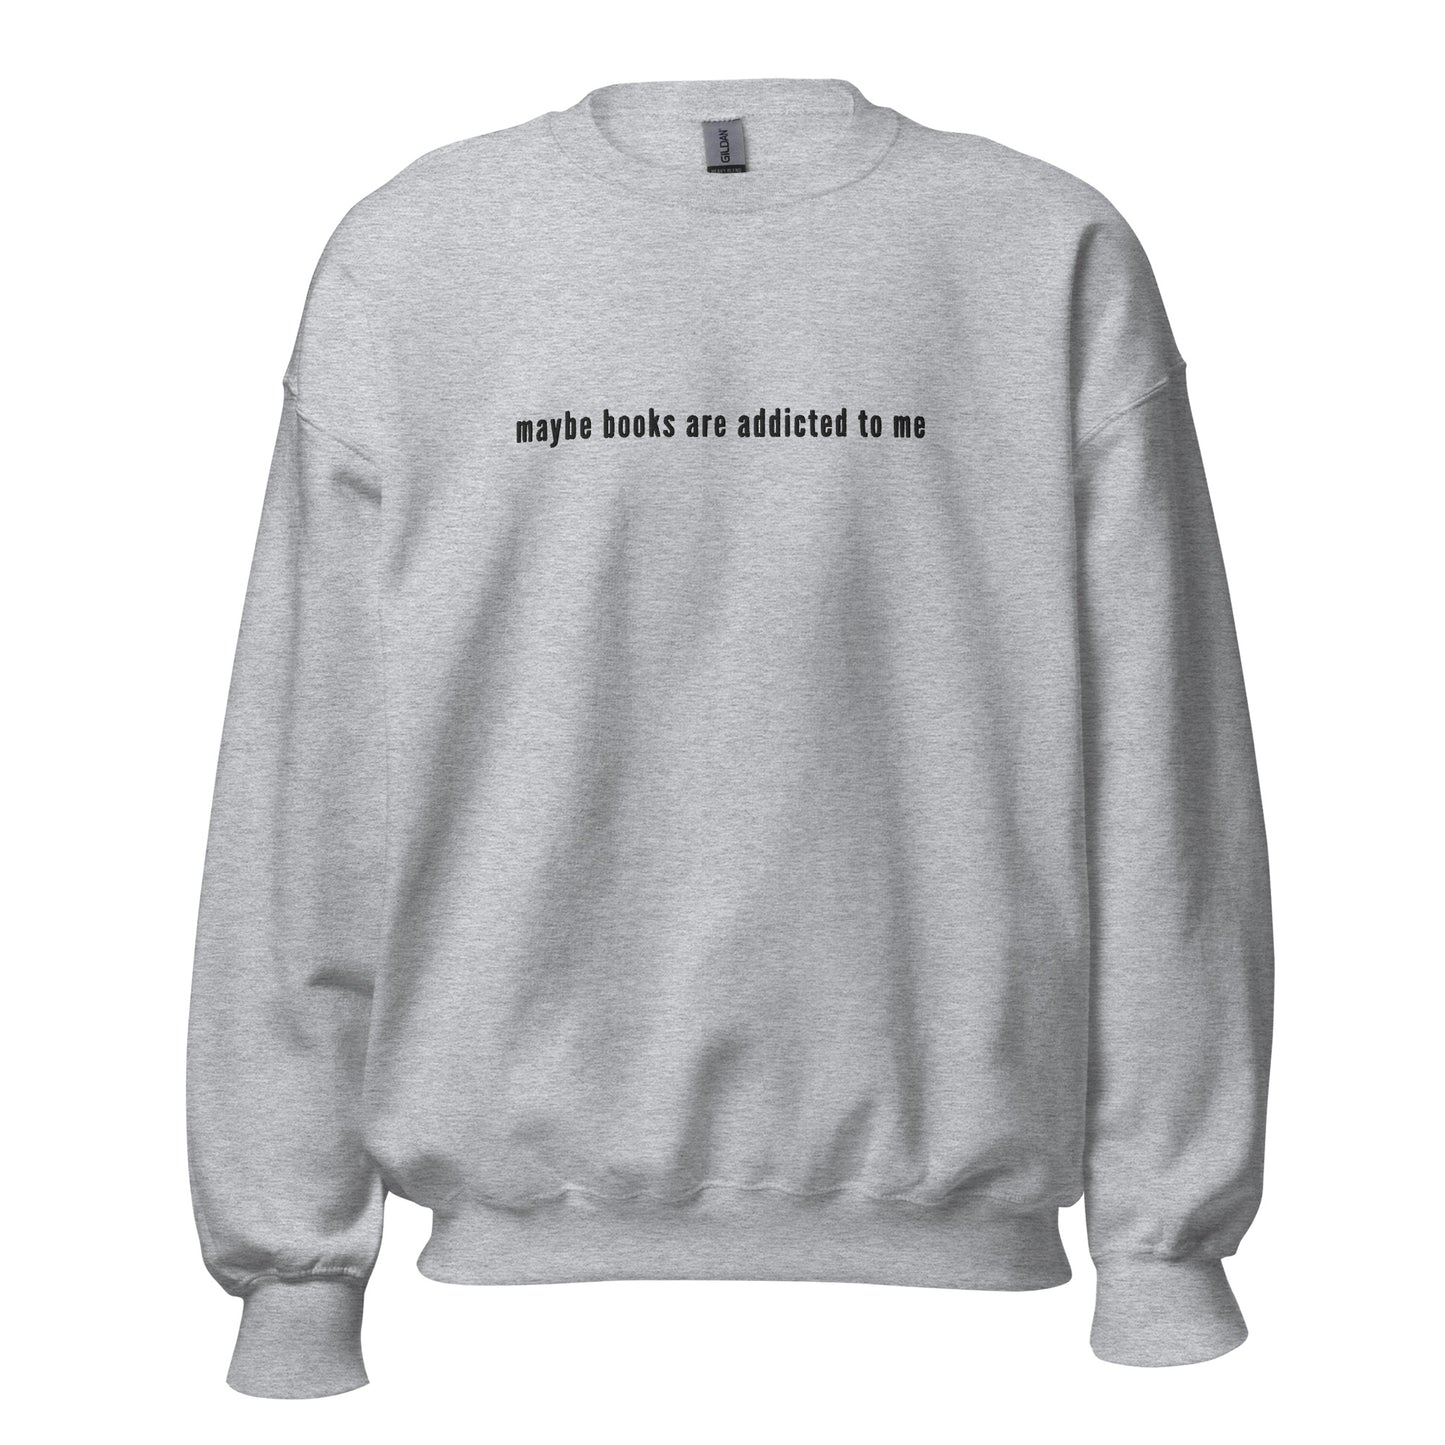 maybe books are addicted to me embroidered sweatshirt